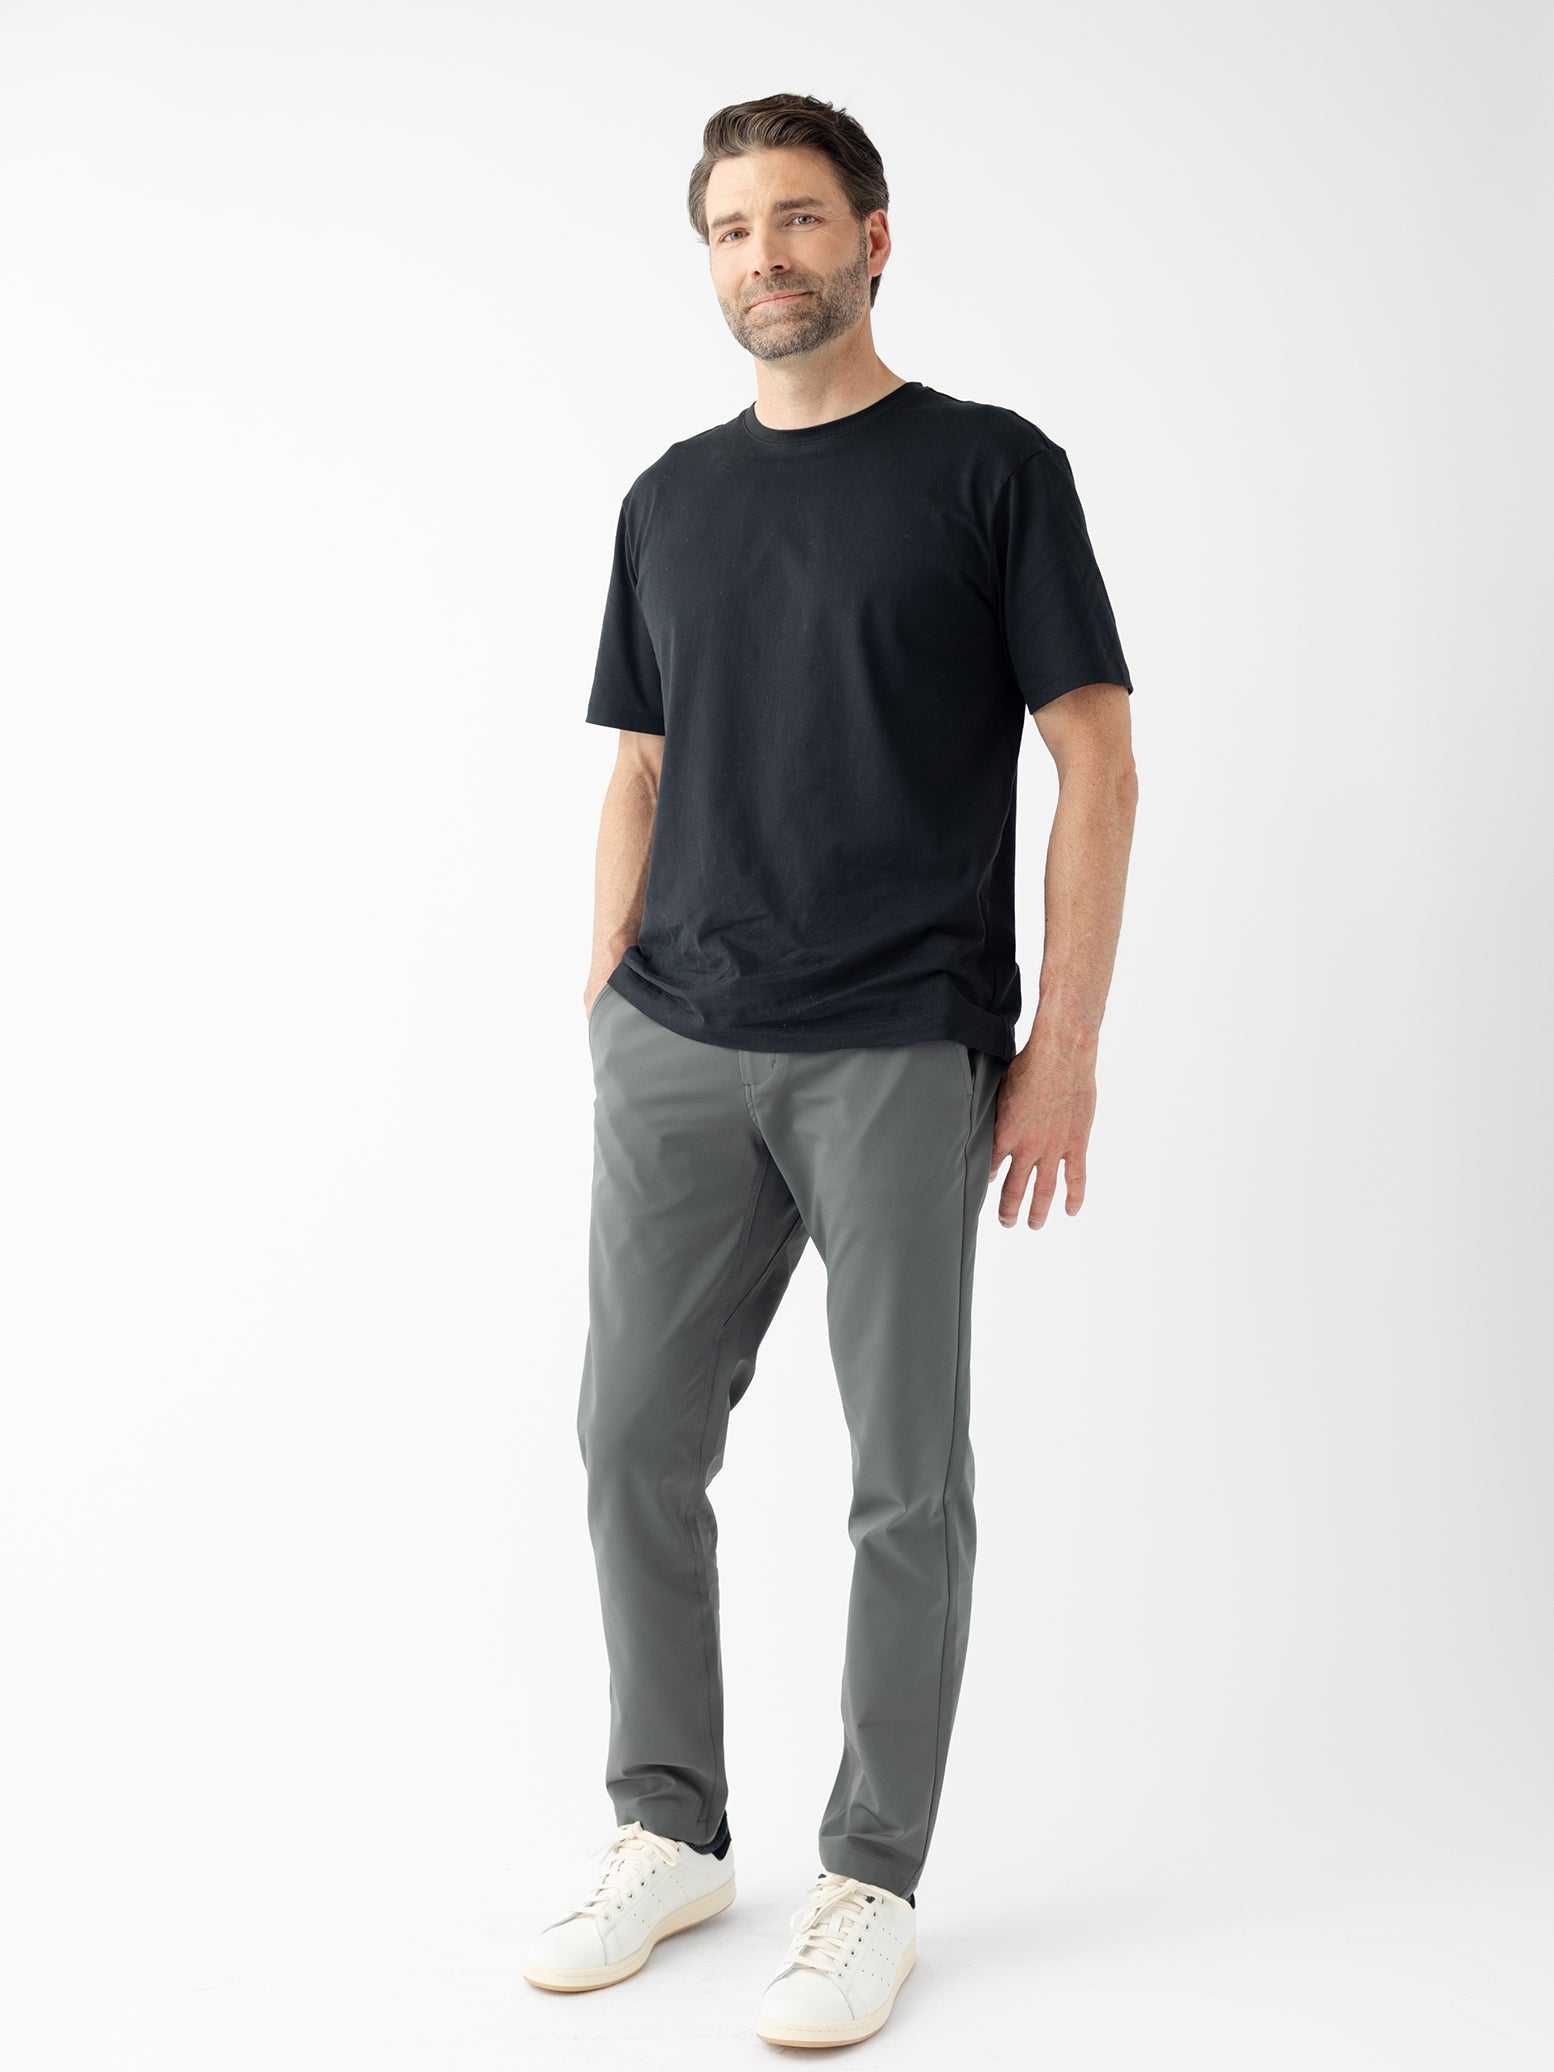 Man wearing black tee and grey pants with white background |Color:Jet Black